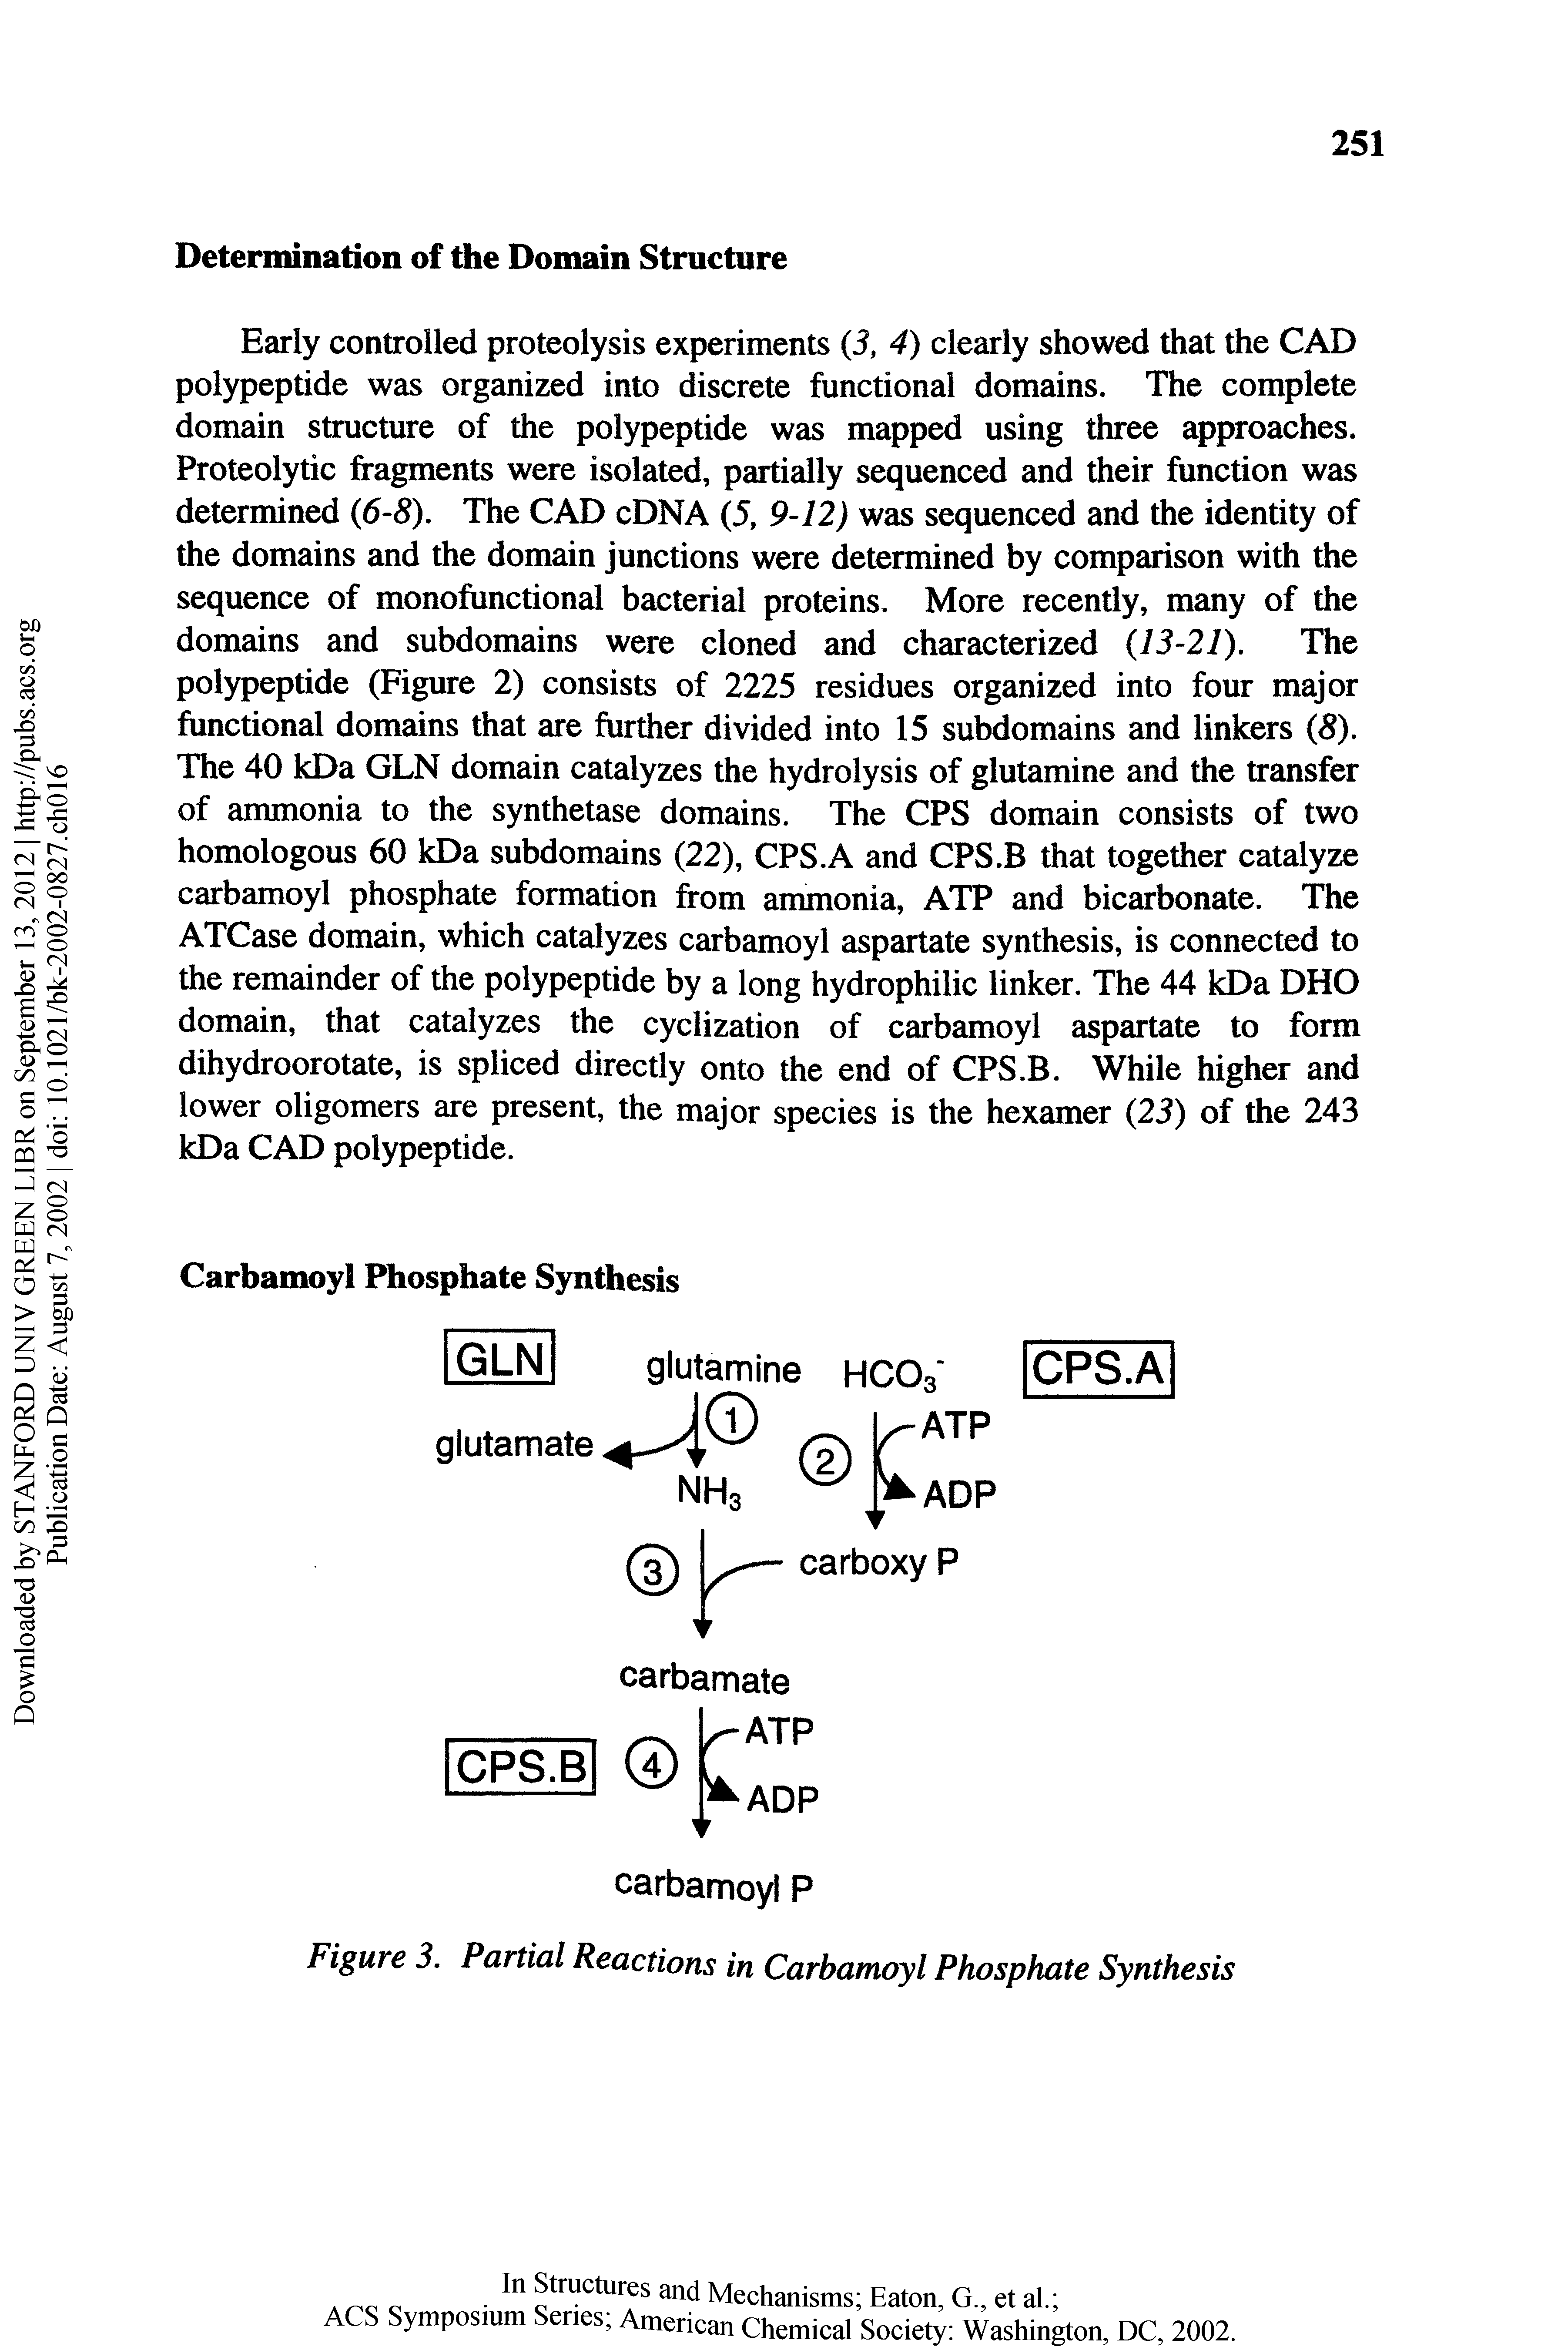 Figure 3. Partial Reactions in Carbamoyl Phosphate Synthesis...